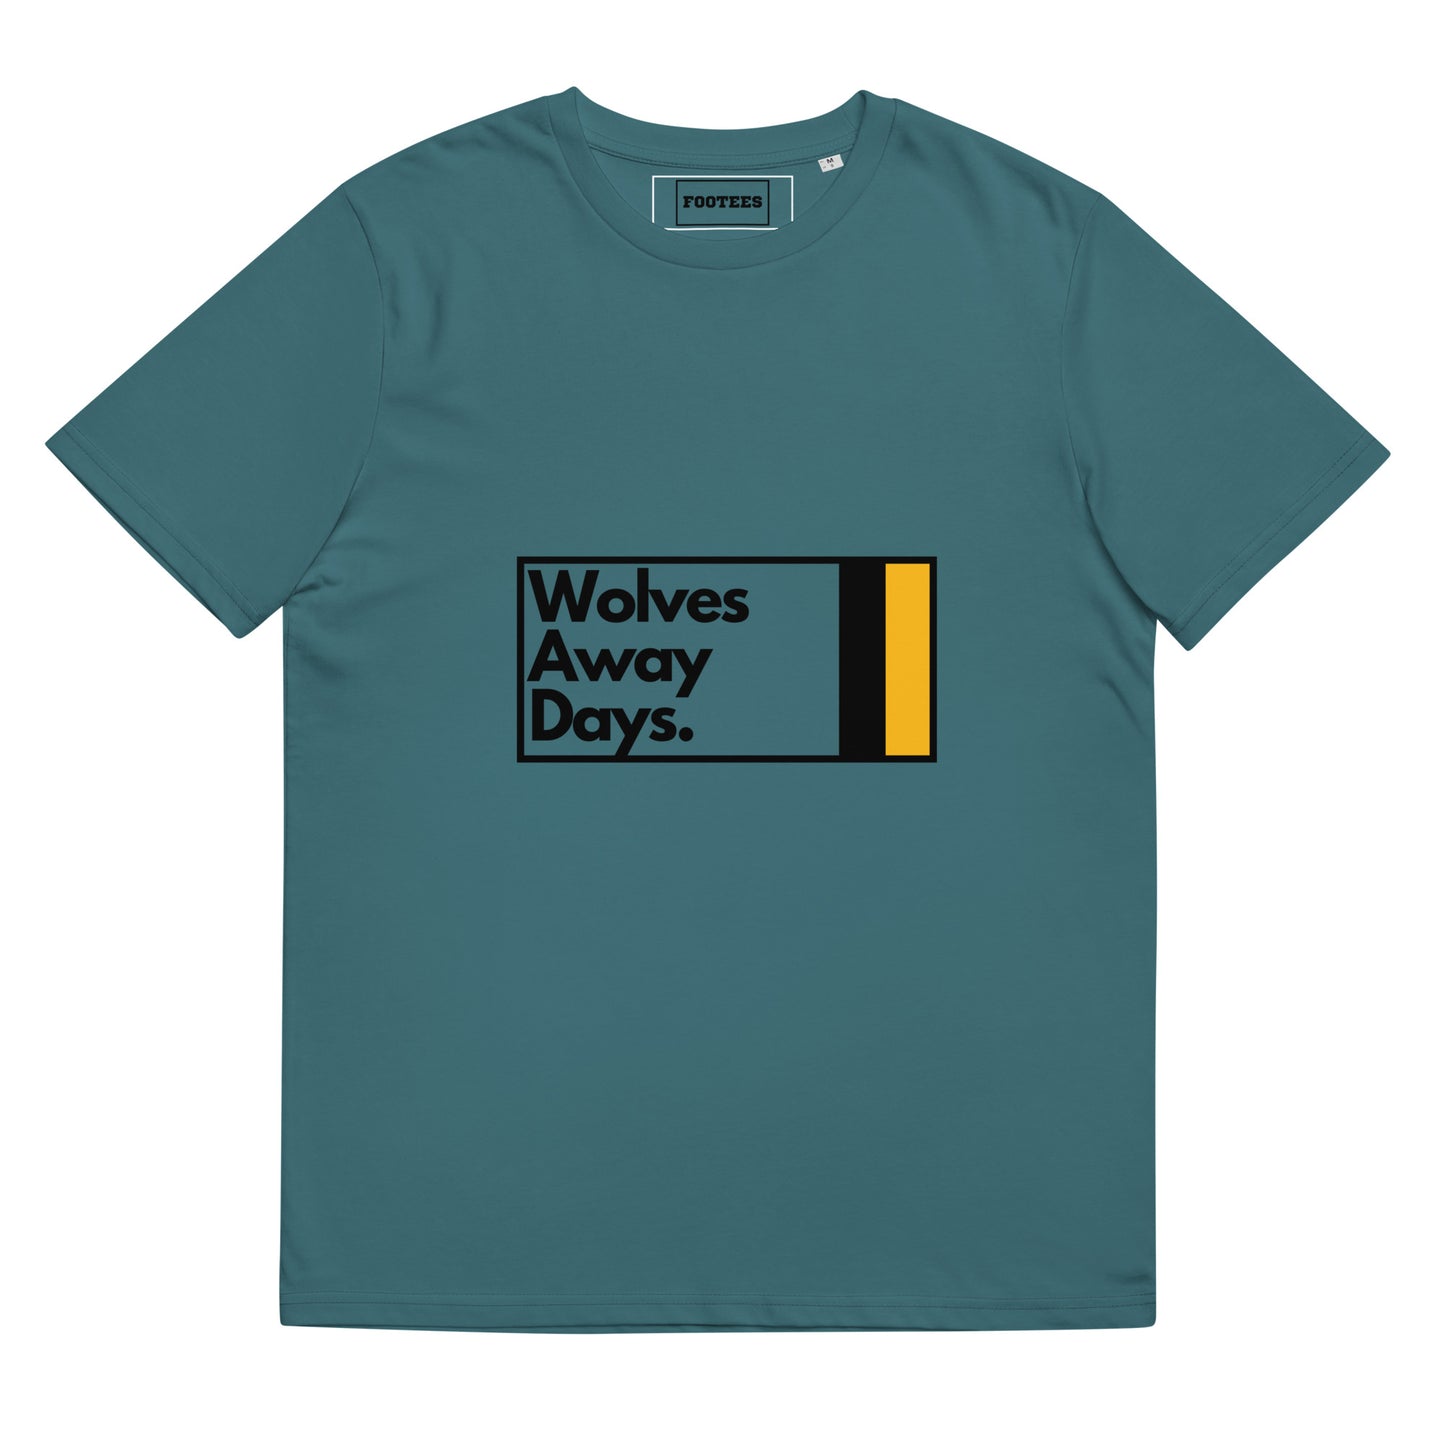 Wolves Away Days Tee